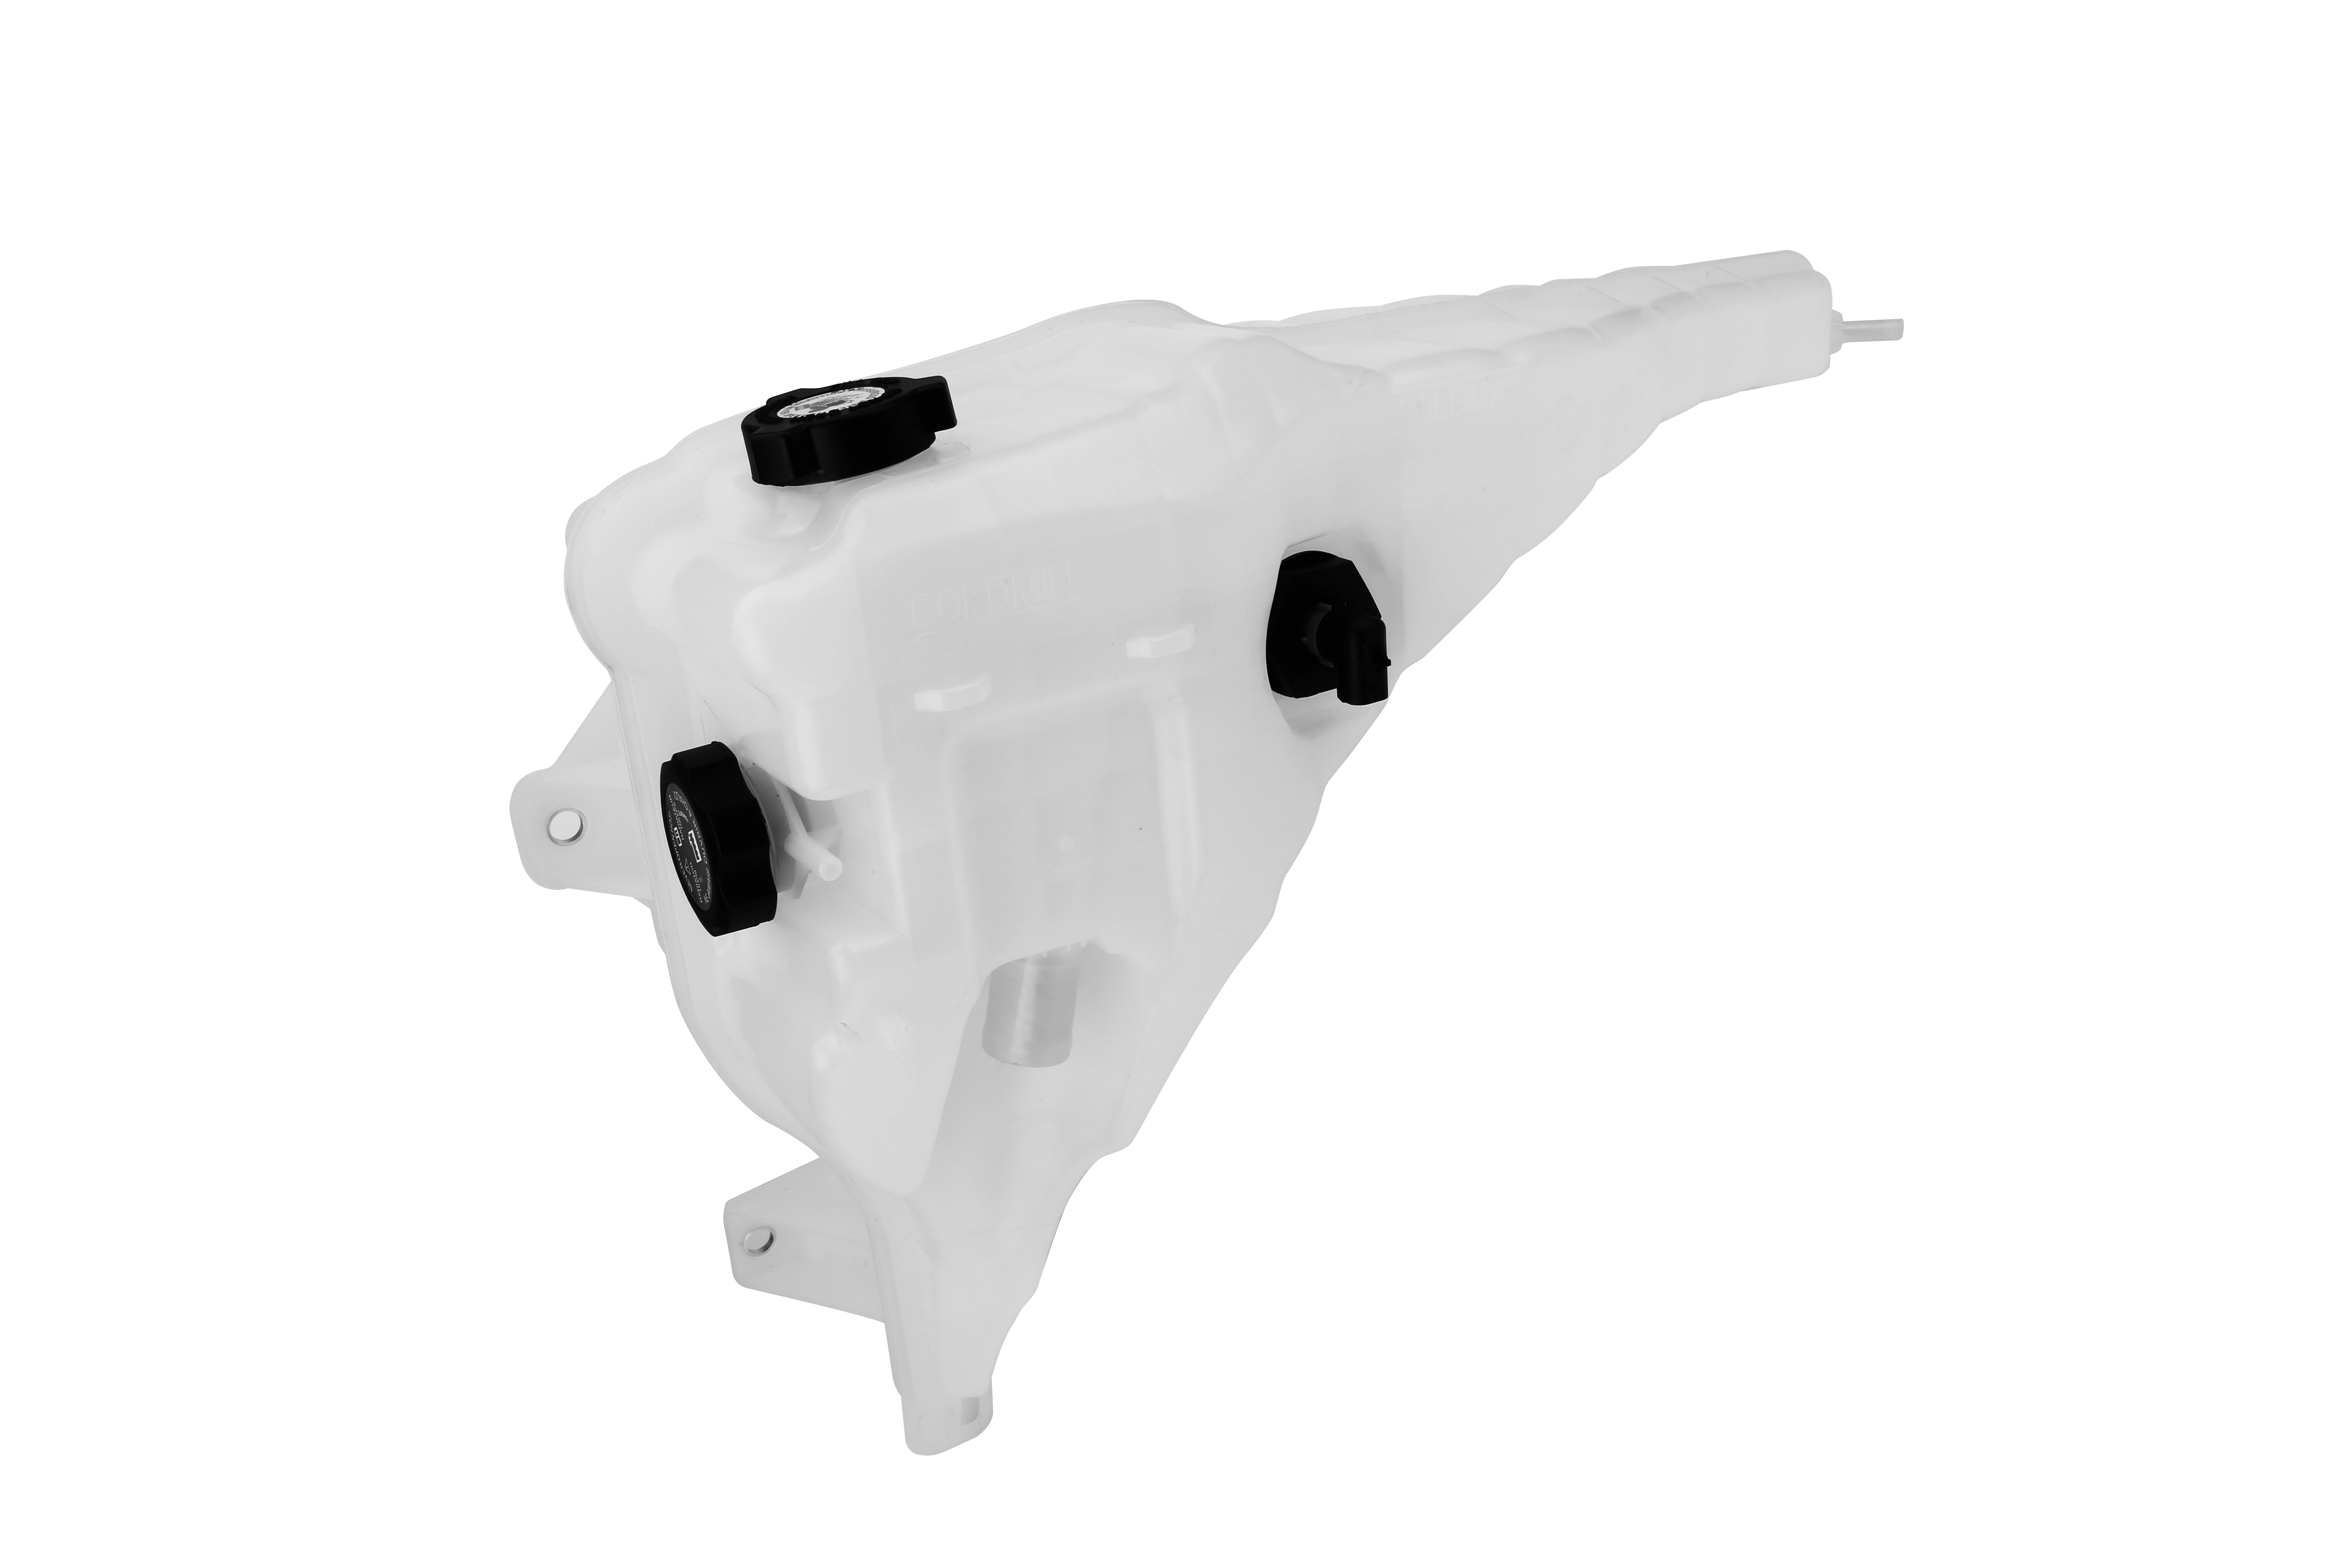 Replacement Coolant Reservoir Tank - Replaces 525263005 - Fits Freightliner Vehicles Image